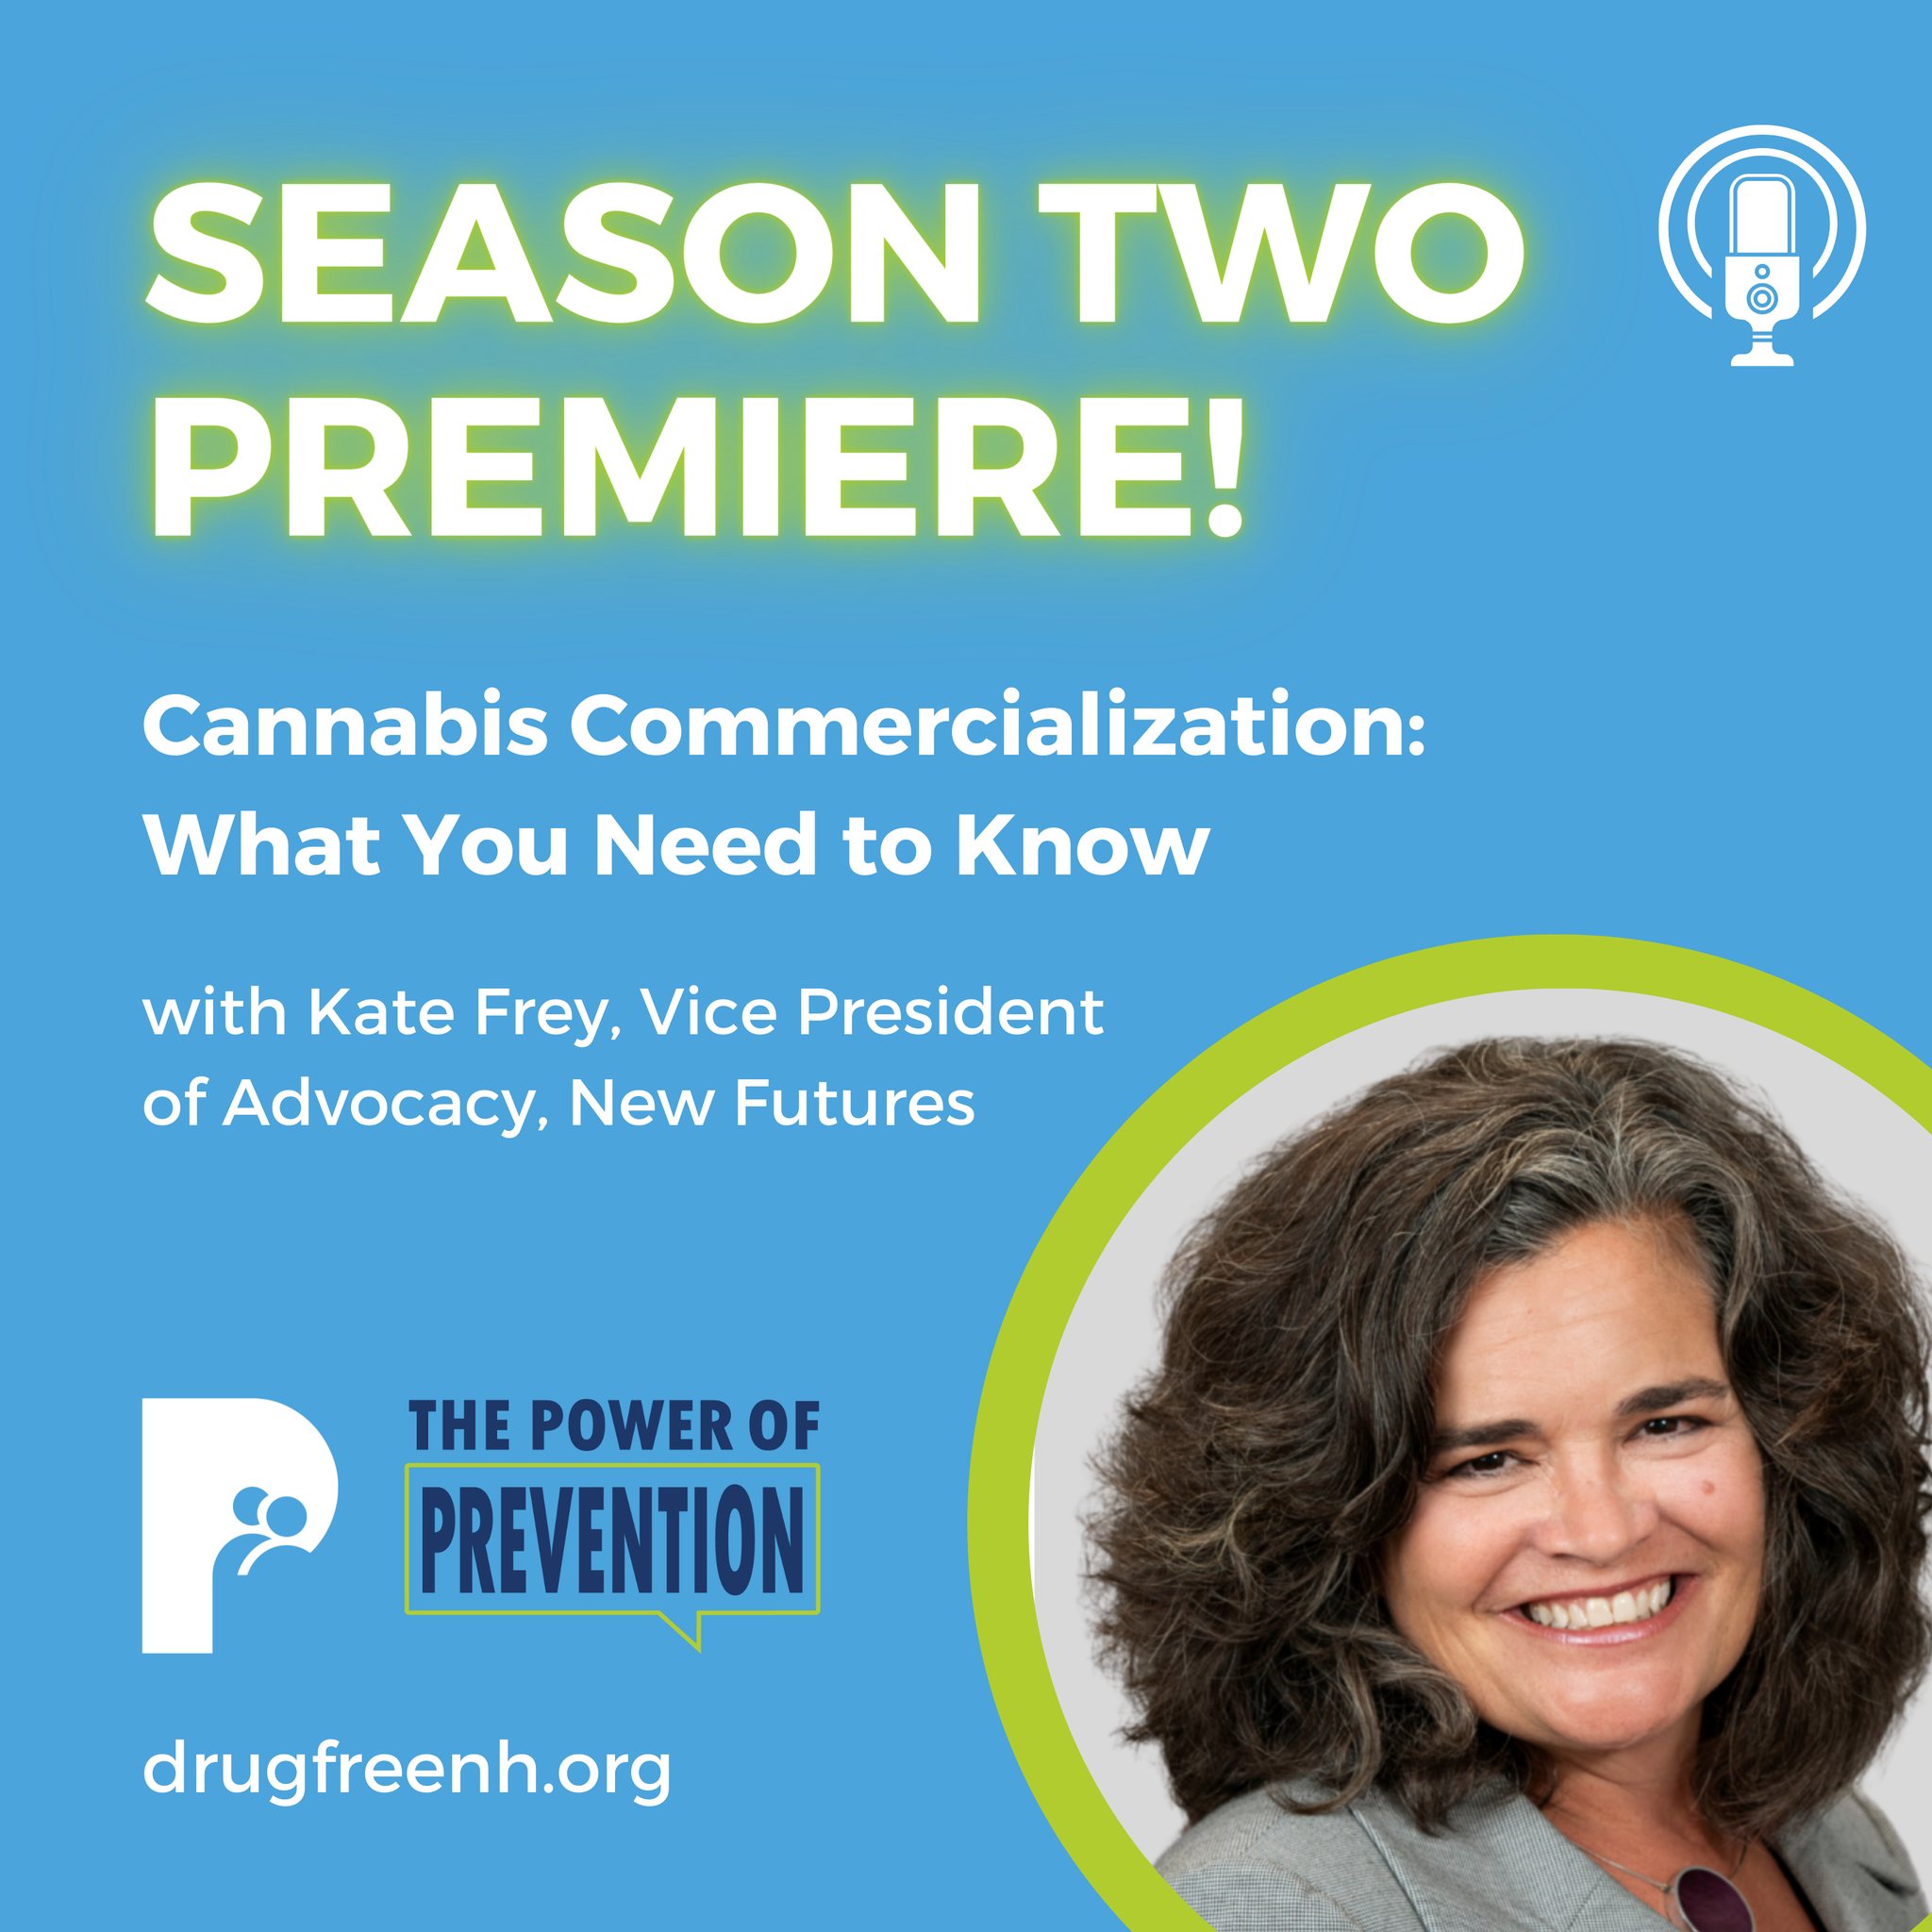 Kate Frey discusses cannabis policy on The Power of Prevention podcast